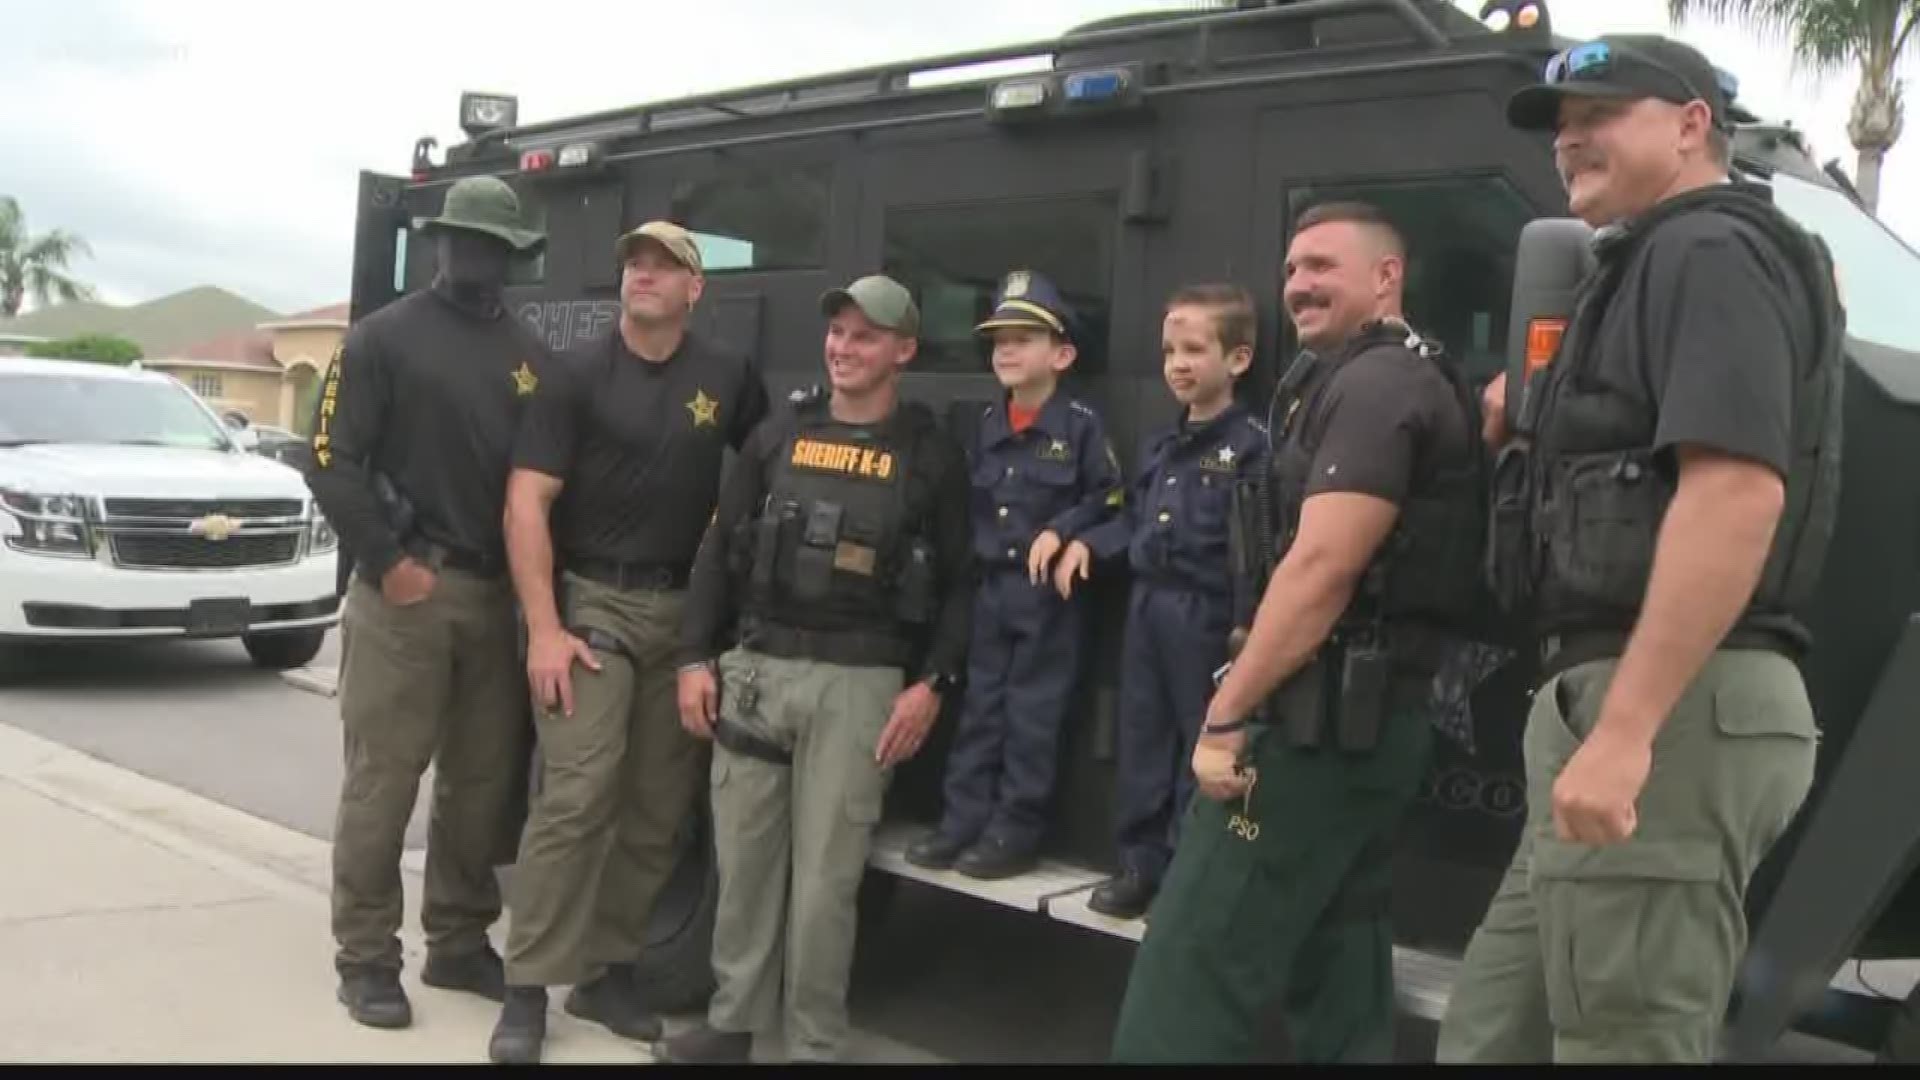 Almost a week after getting hit by a car while trick-or-treating, Dominick Keyes got the chance to meet up with some SWAT team members he deeply admires.